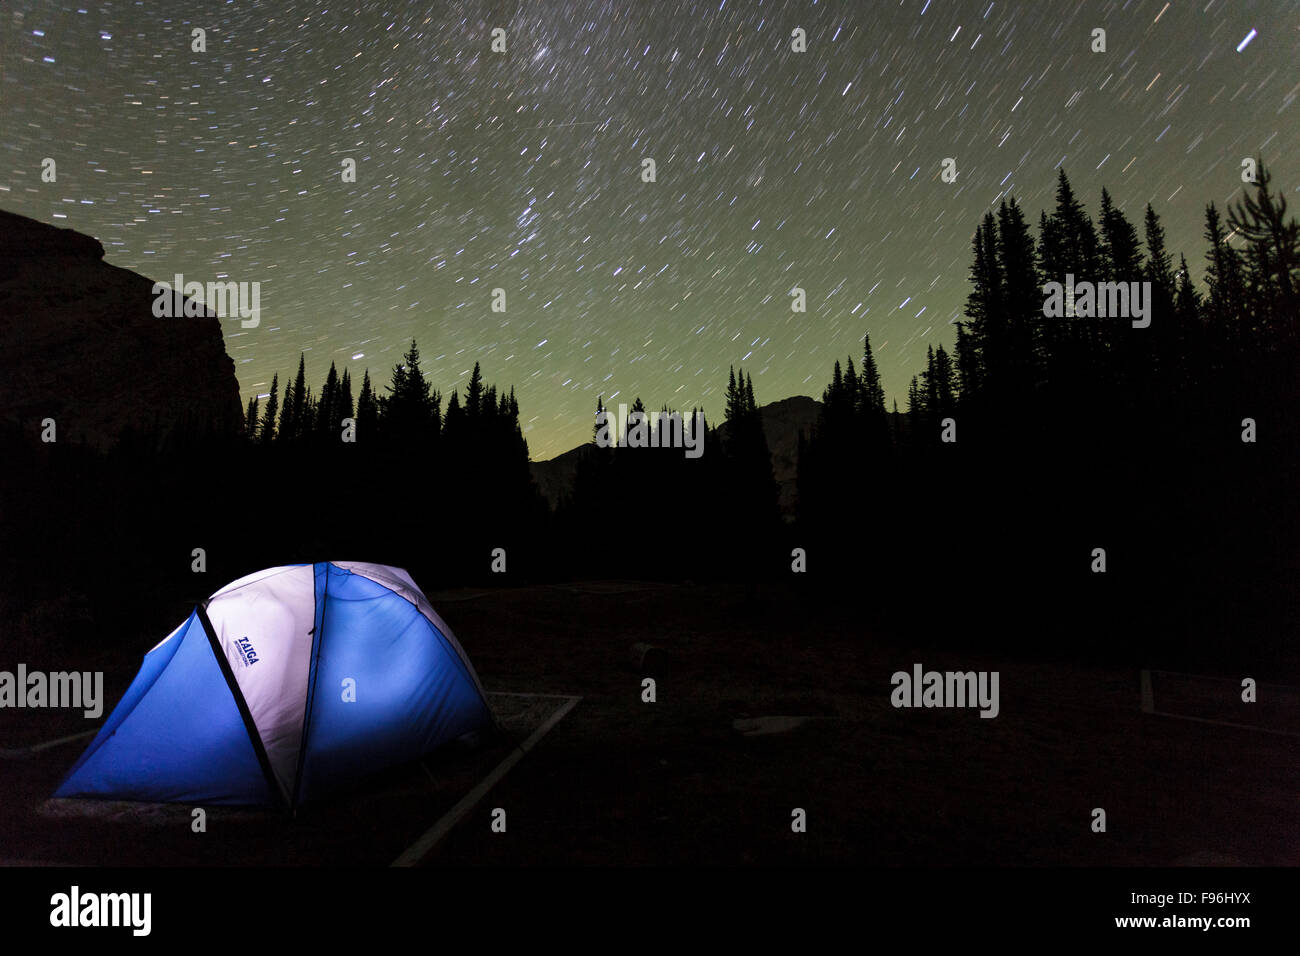 Camping under the stars at Baker Lake in the Skoki wilderness area of Banff National Park,Alberta, Canada. Stock Photo